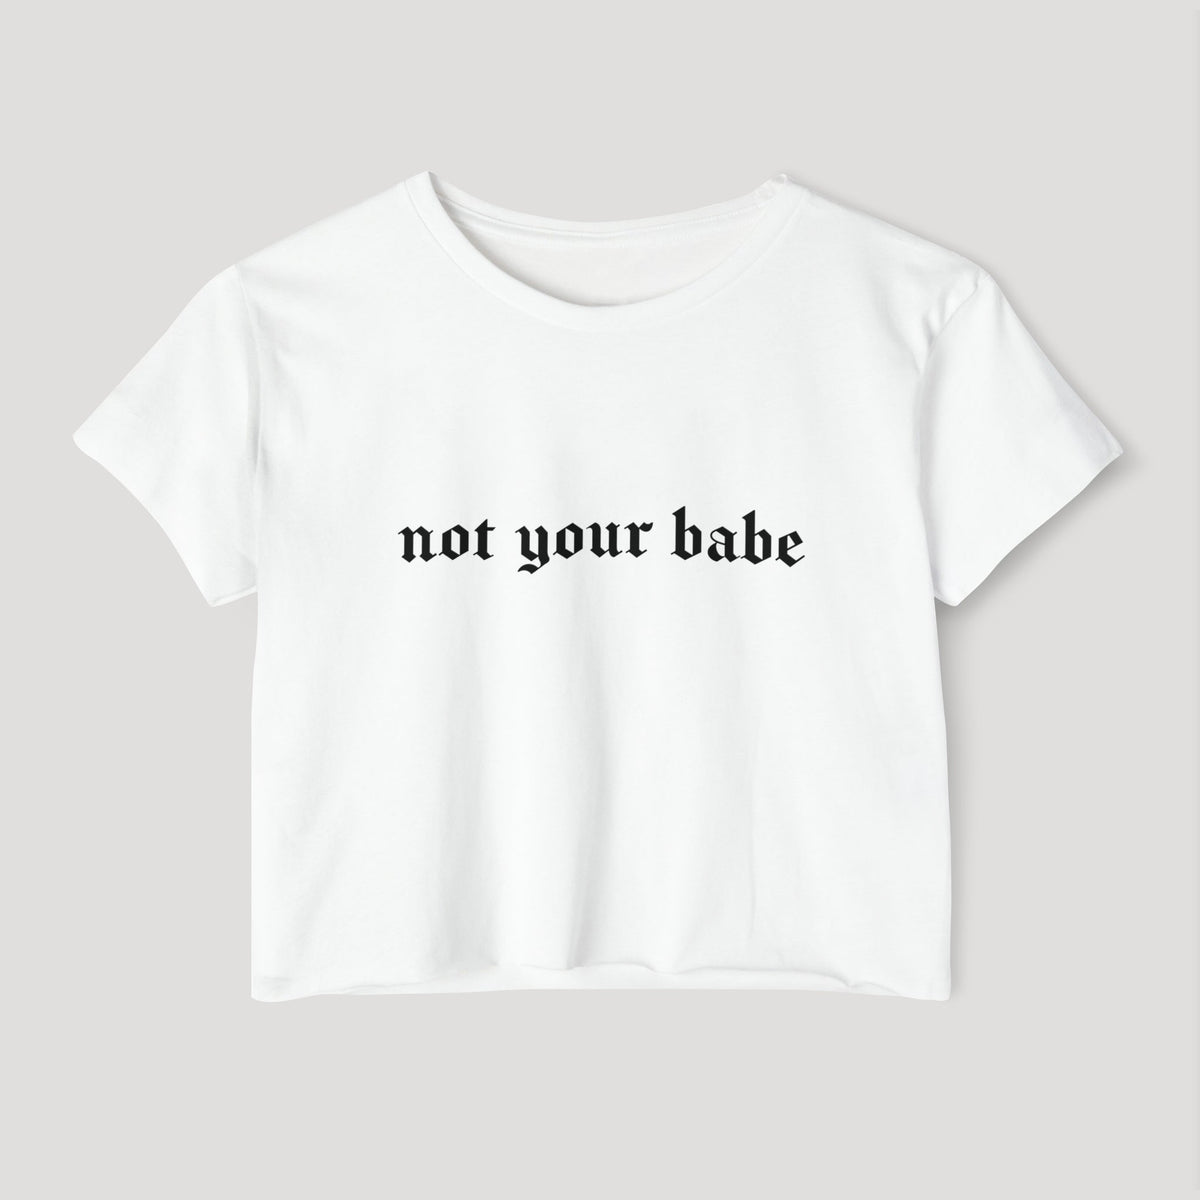 Not Your Babe Women's Lightweight Crop Top (READY TO SHIP) - Goth Cloth Co.20923445789992698000